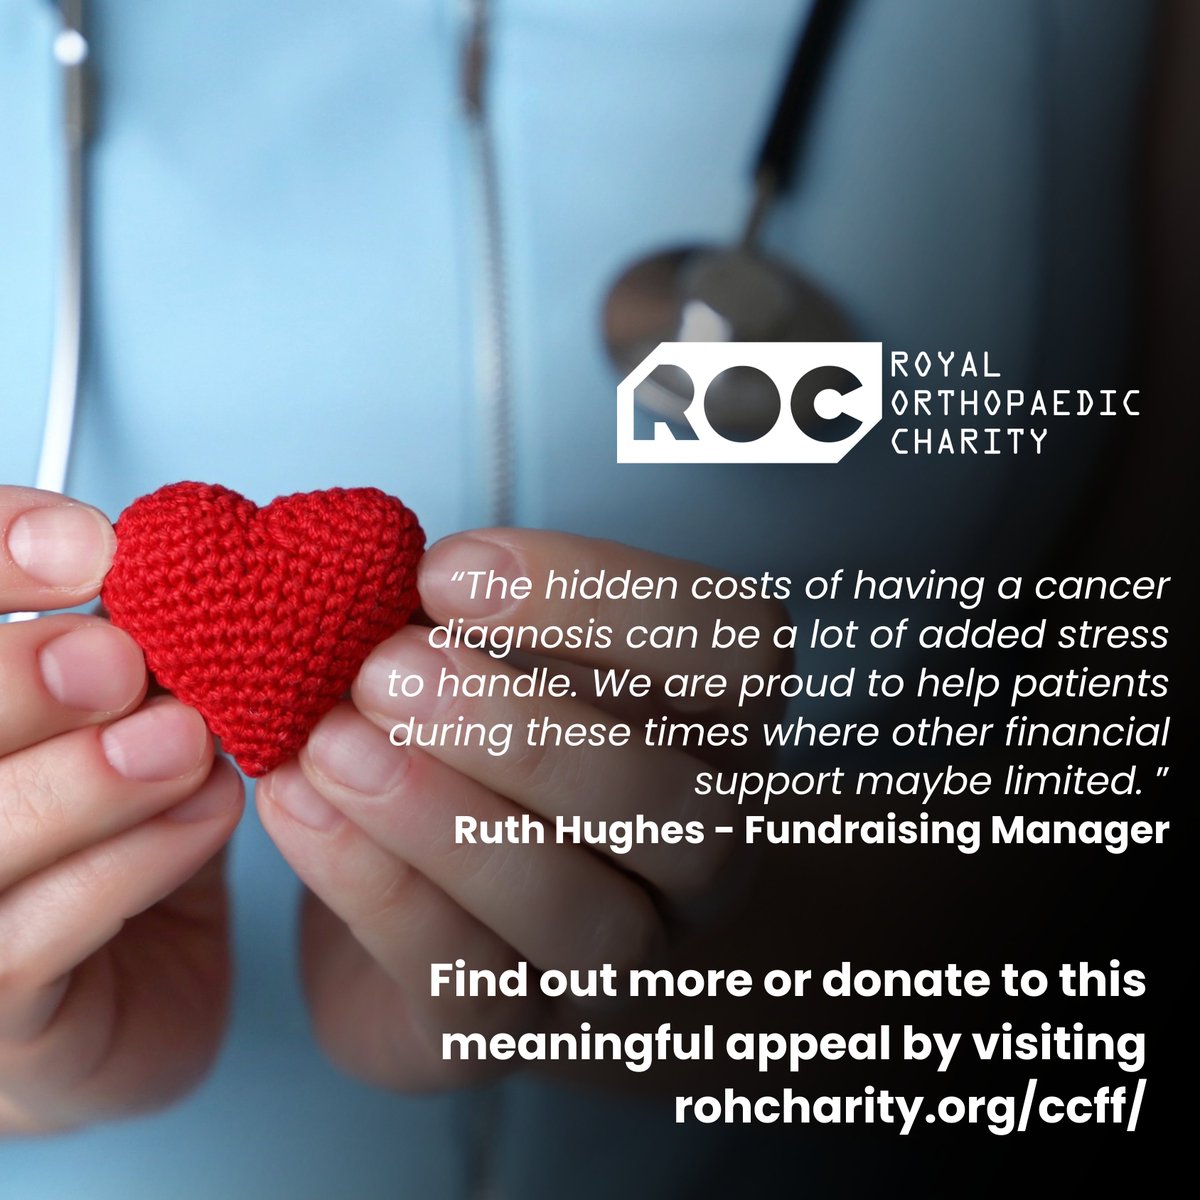 Over £4,000 of support has been given to oncology patients at ROH through our Hardship Fund. The Hardship Fund is in place to support those in financial need, to help pay for accommodation & travel expenses. To find out more, visit rohcharity.org/ccff/ #WorldCancerDay